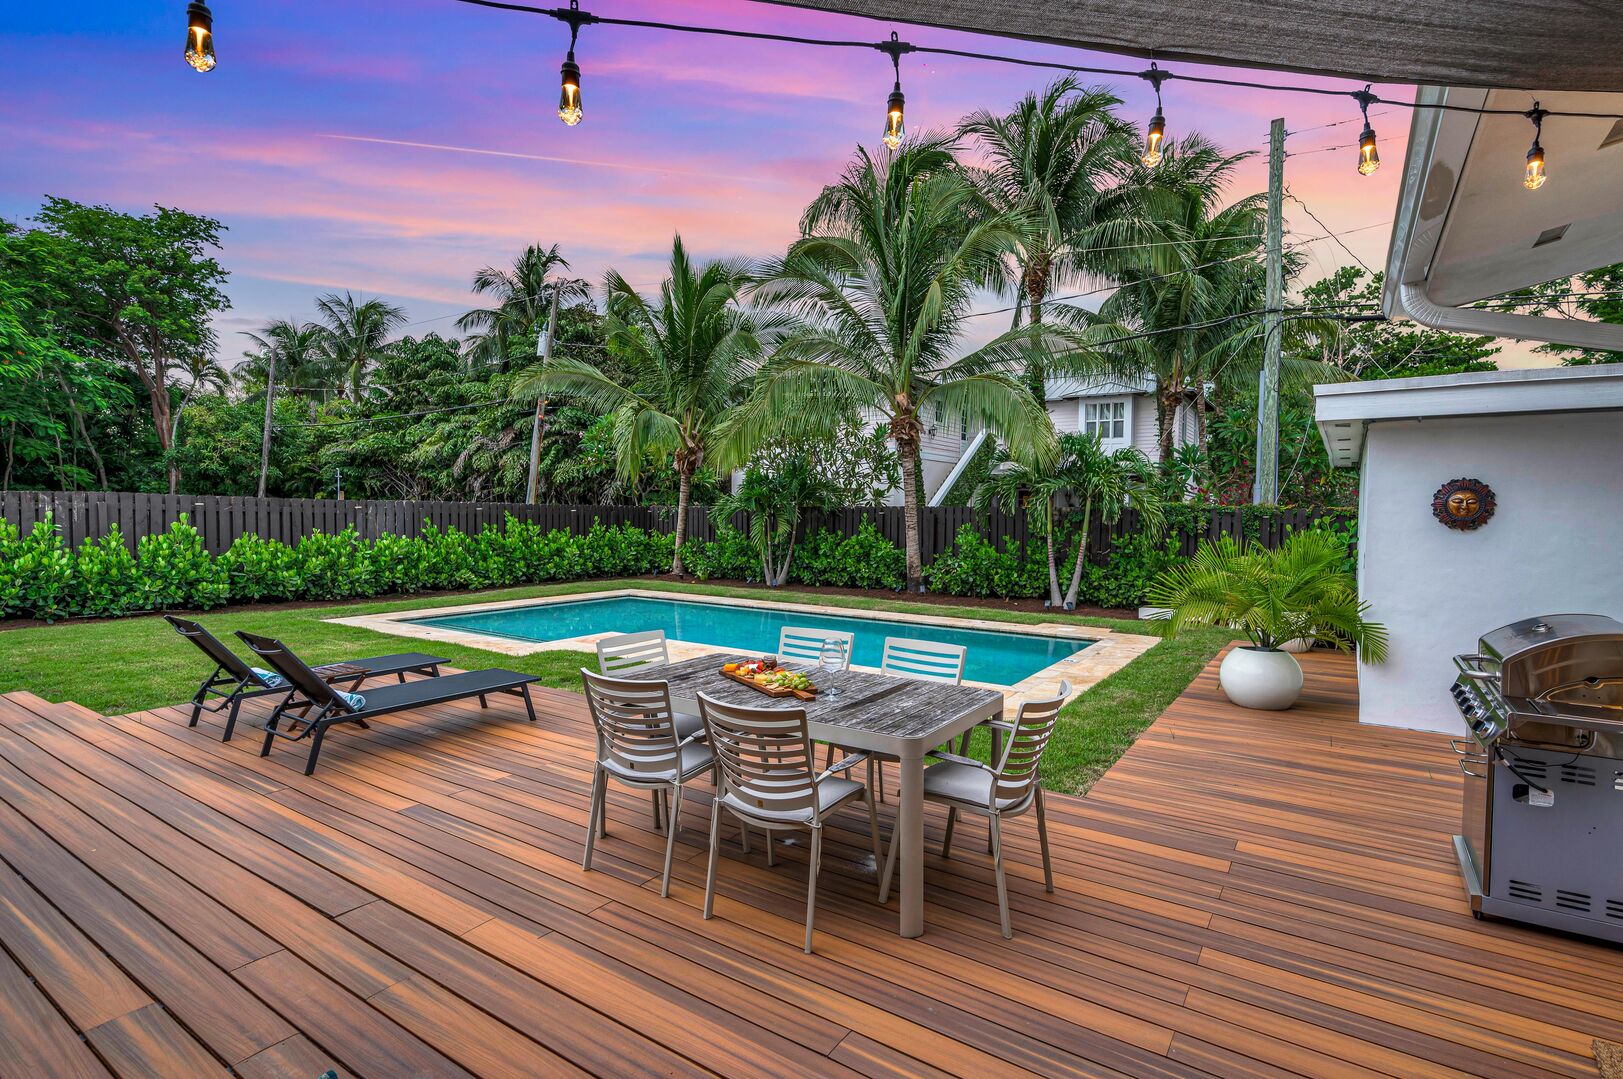 Florida Dreamscape: Immerse Yourself in Outdoor Splendor with Dining for Six, a Grilling Haven, and Lounge Area, All Beneath the Enchanting Pink Skies. Your Sunset Paradise Awaits.